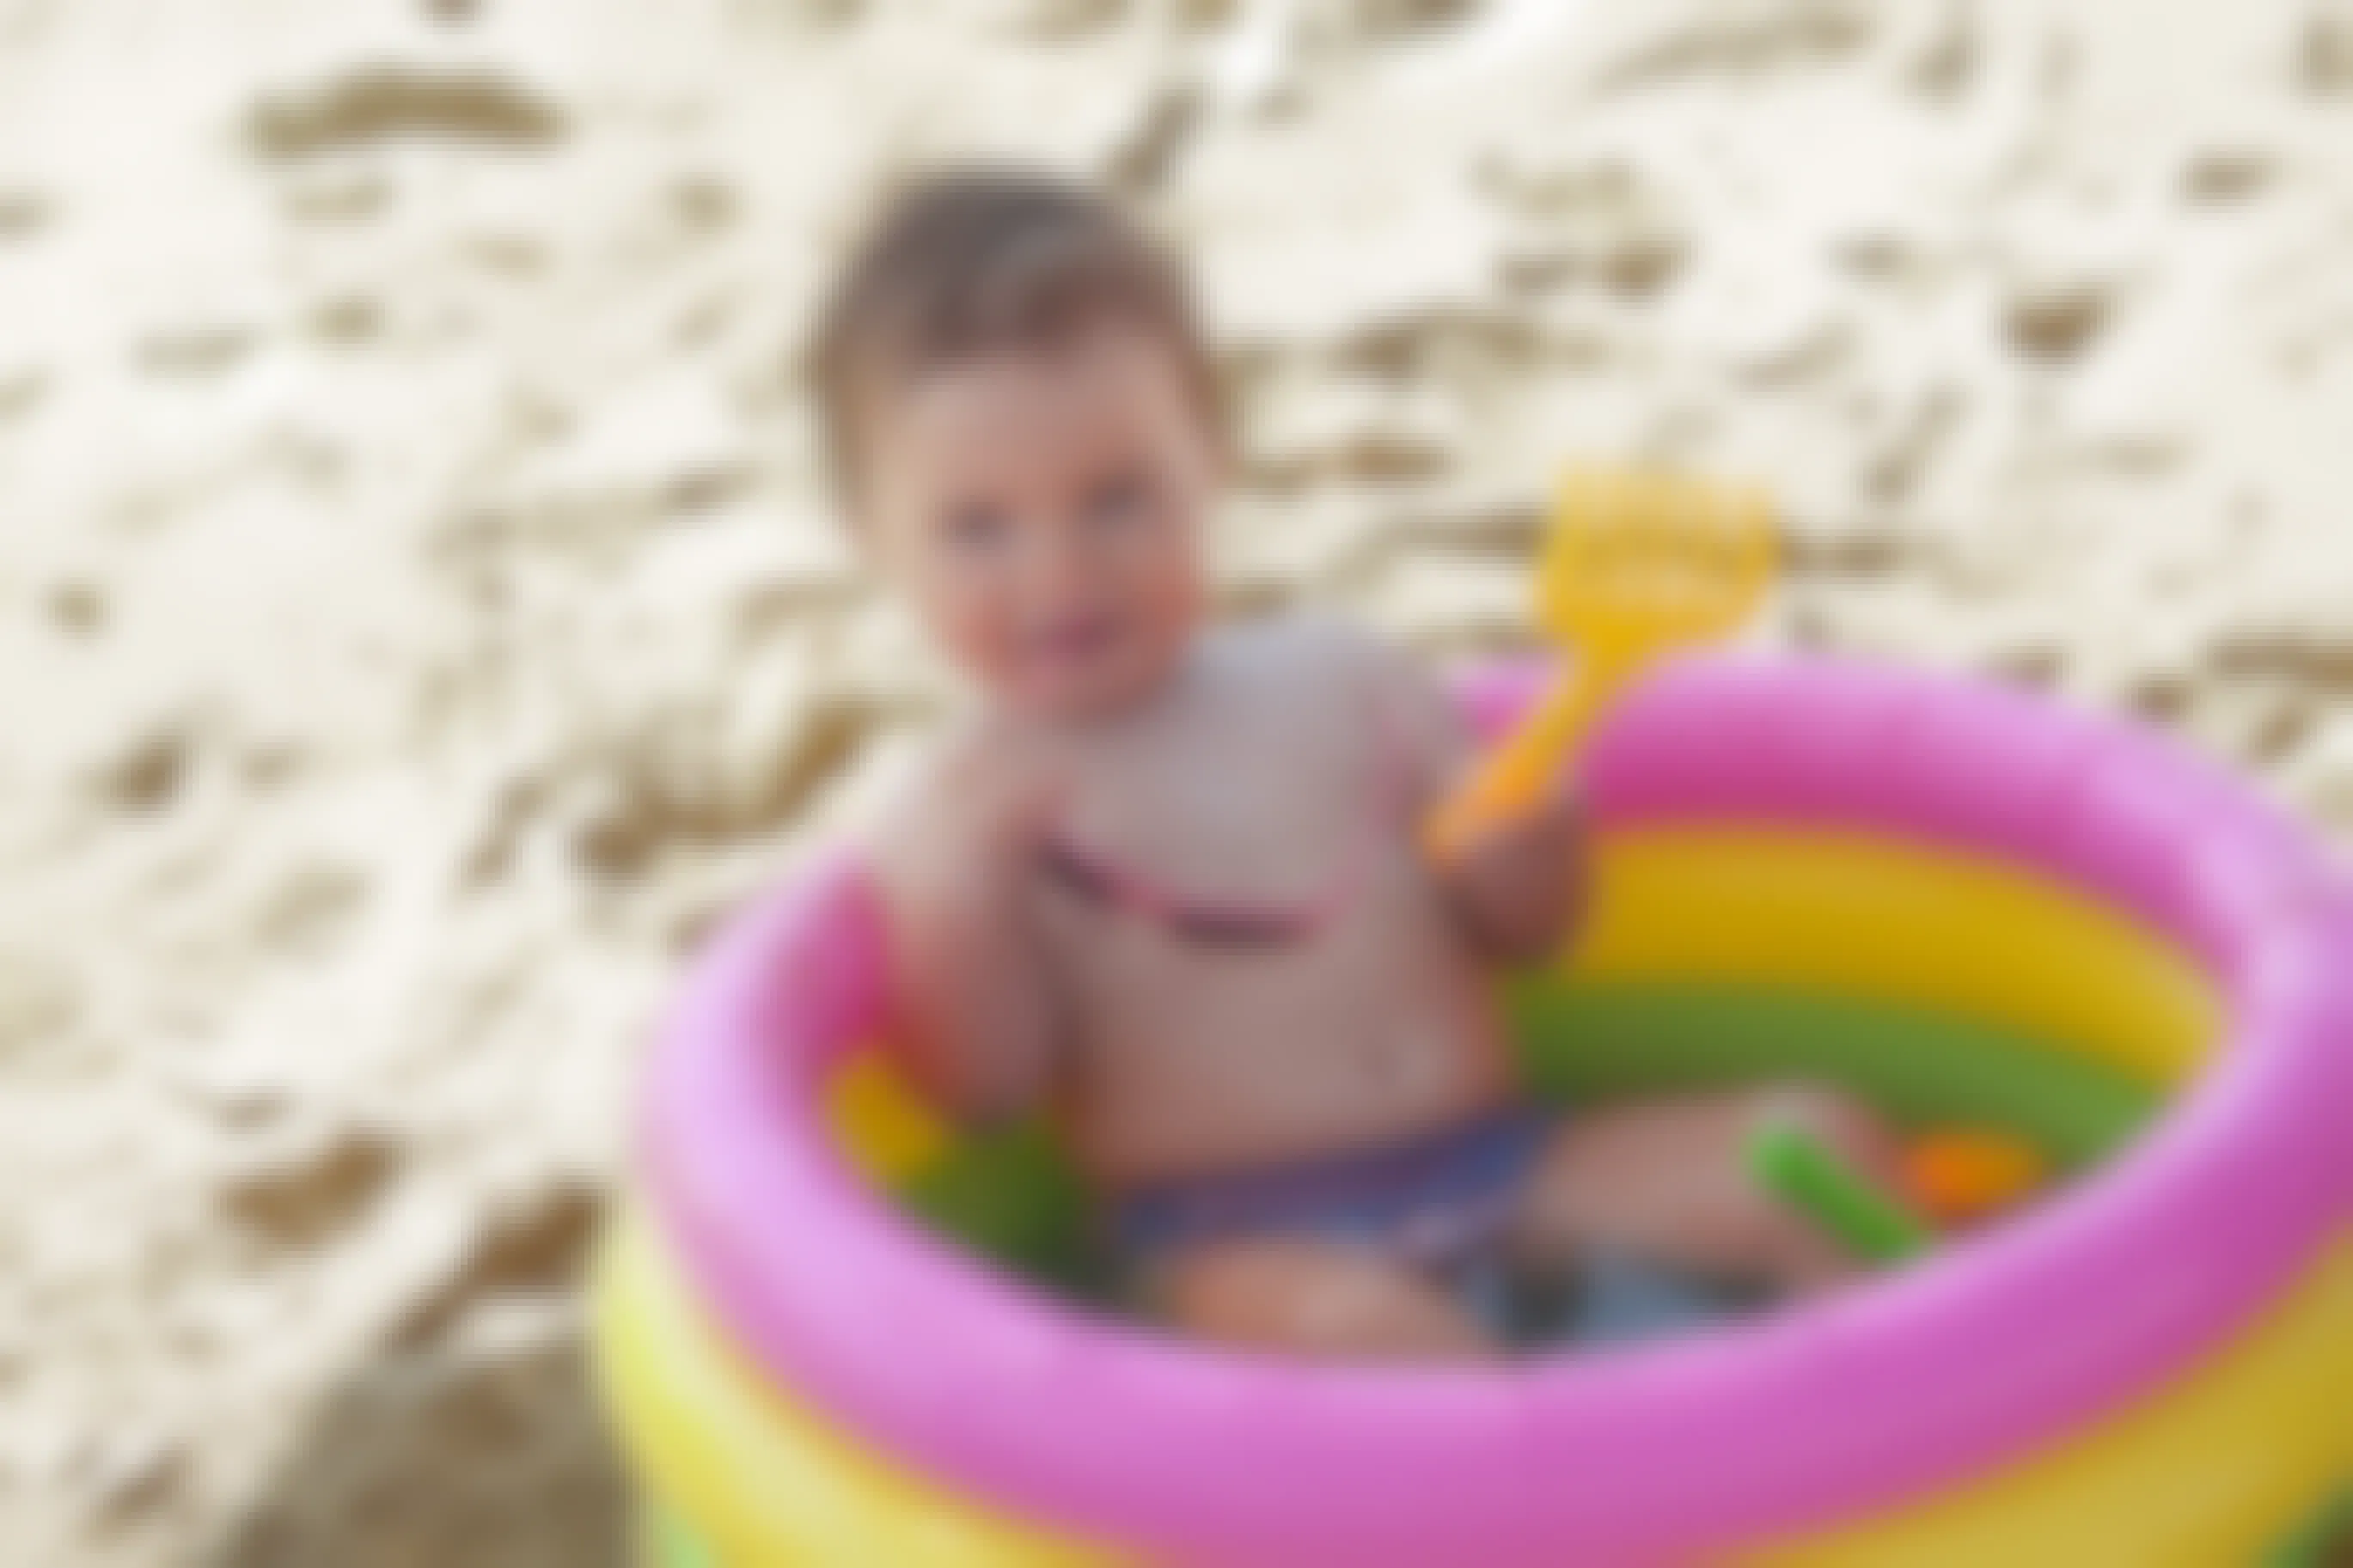 Baby sits inside a kiddie pool at the beach. The baby is holding a plastic toy and a pair of sunglasses